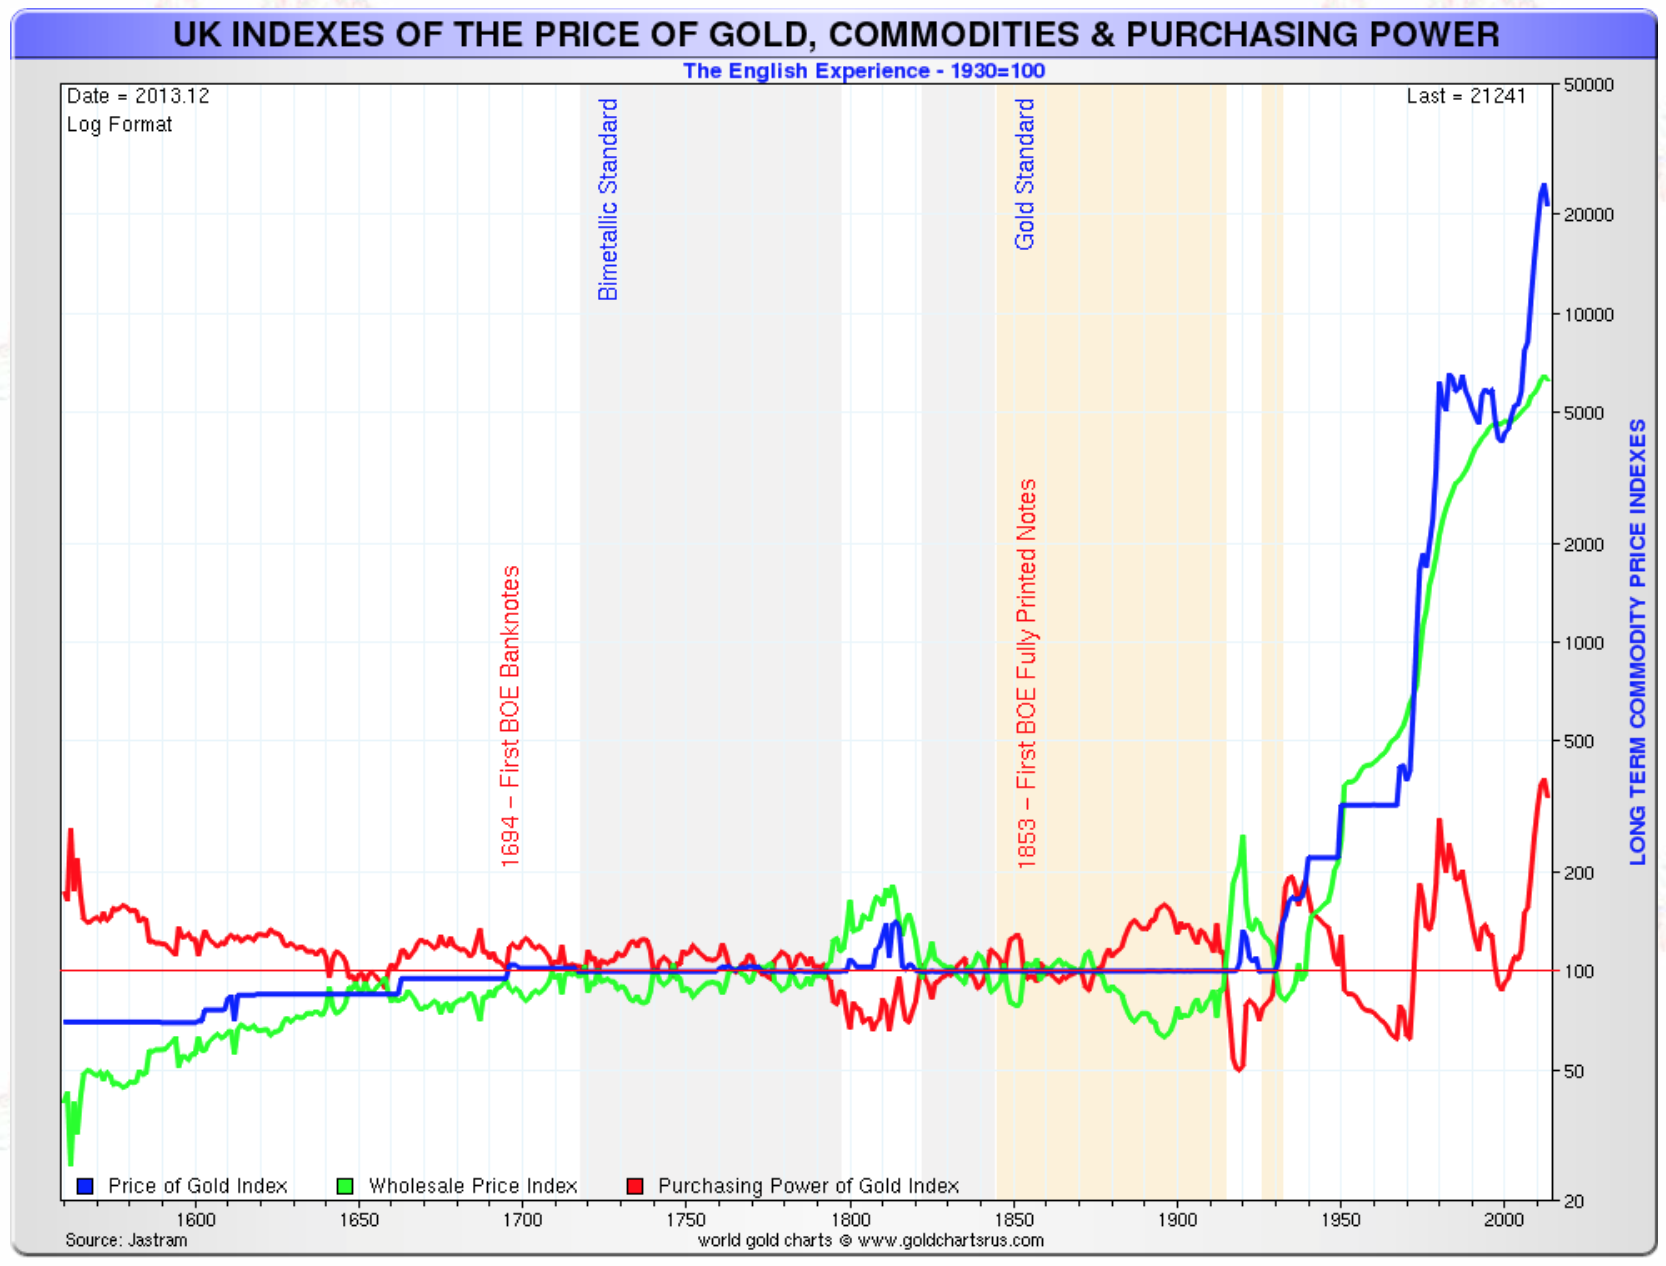 uk indexes of the price of gold, commodities & purchasing power